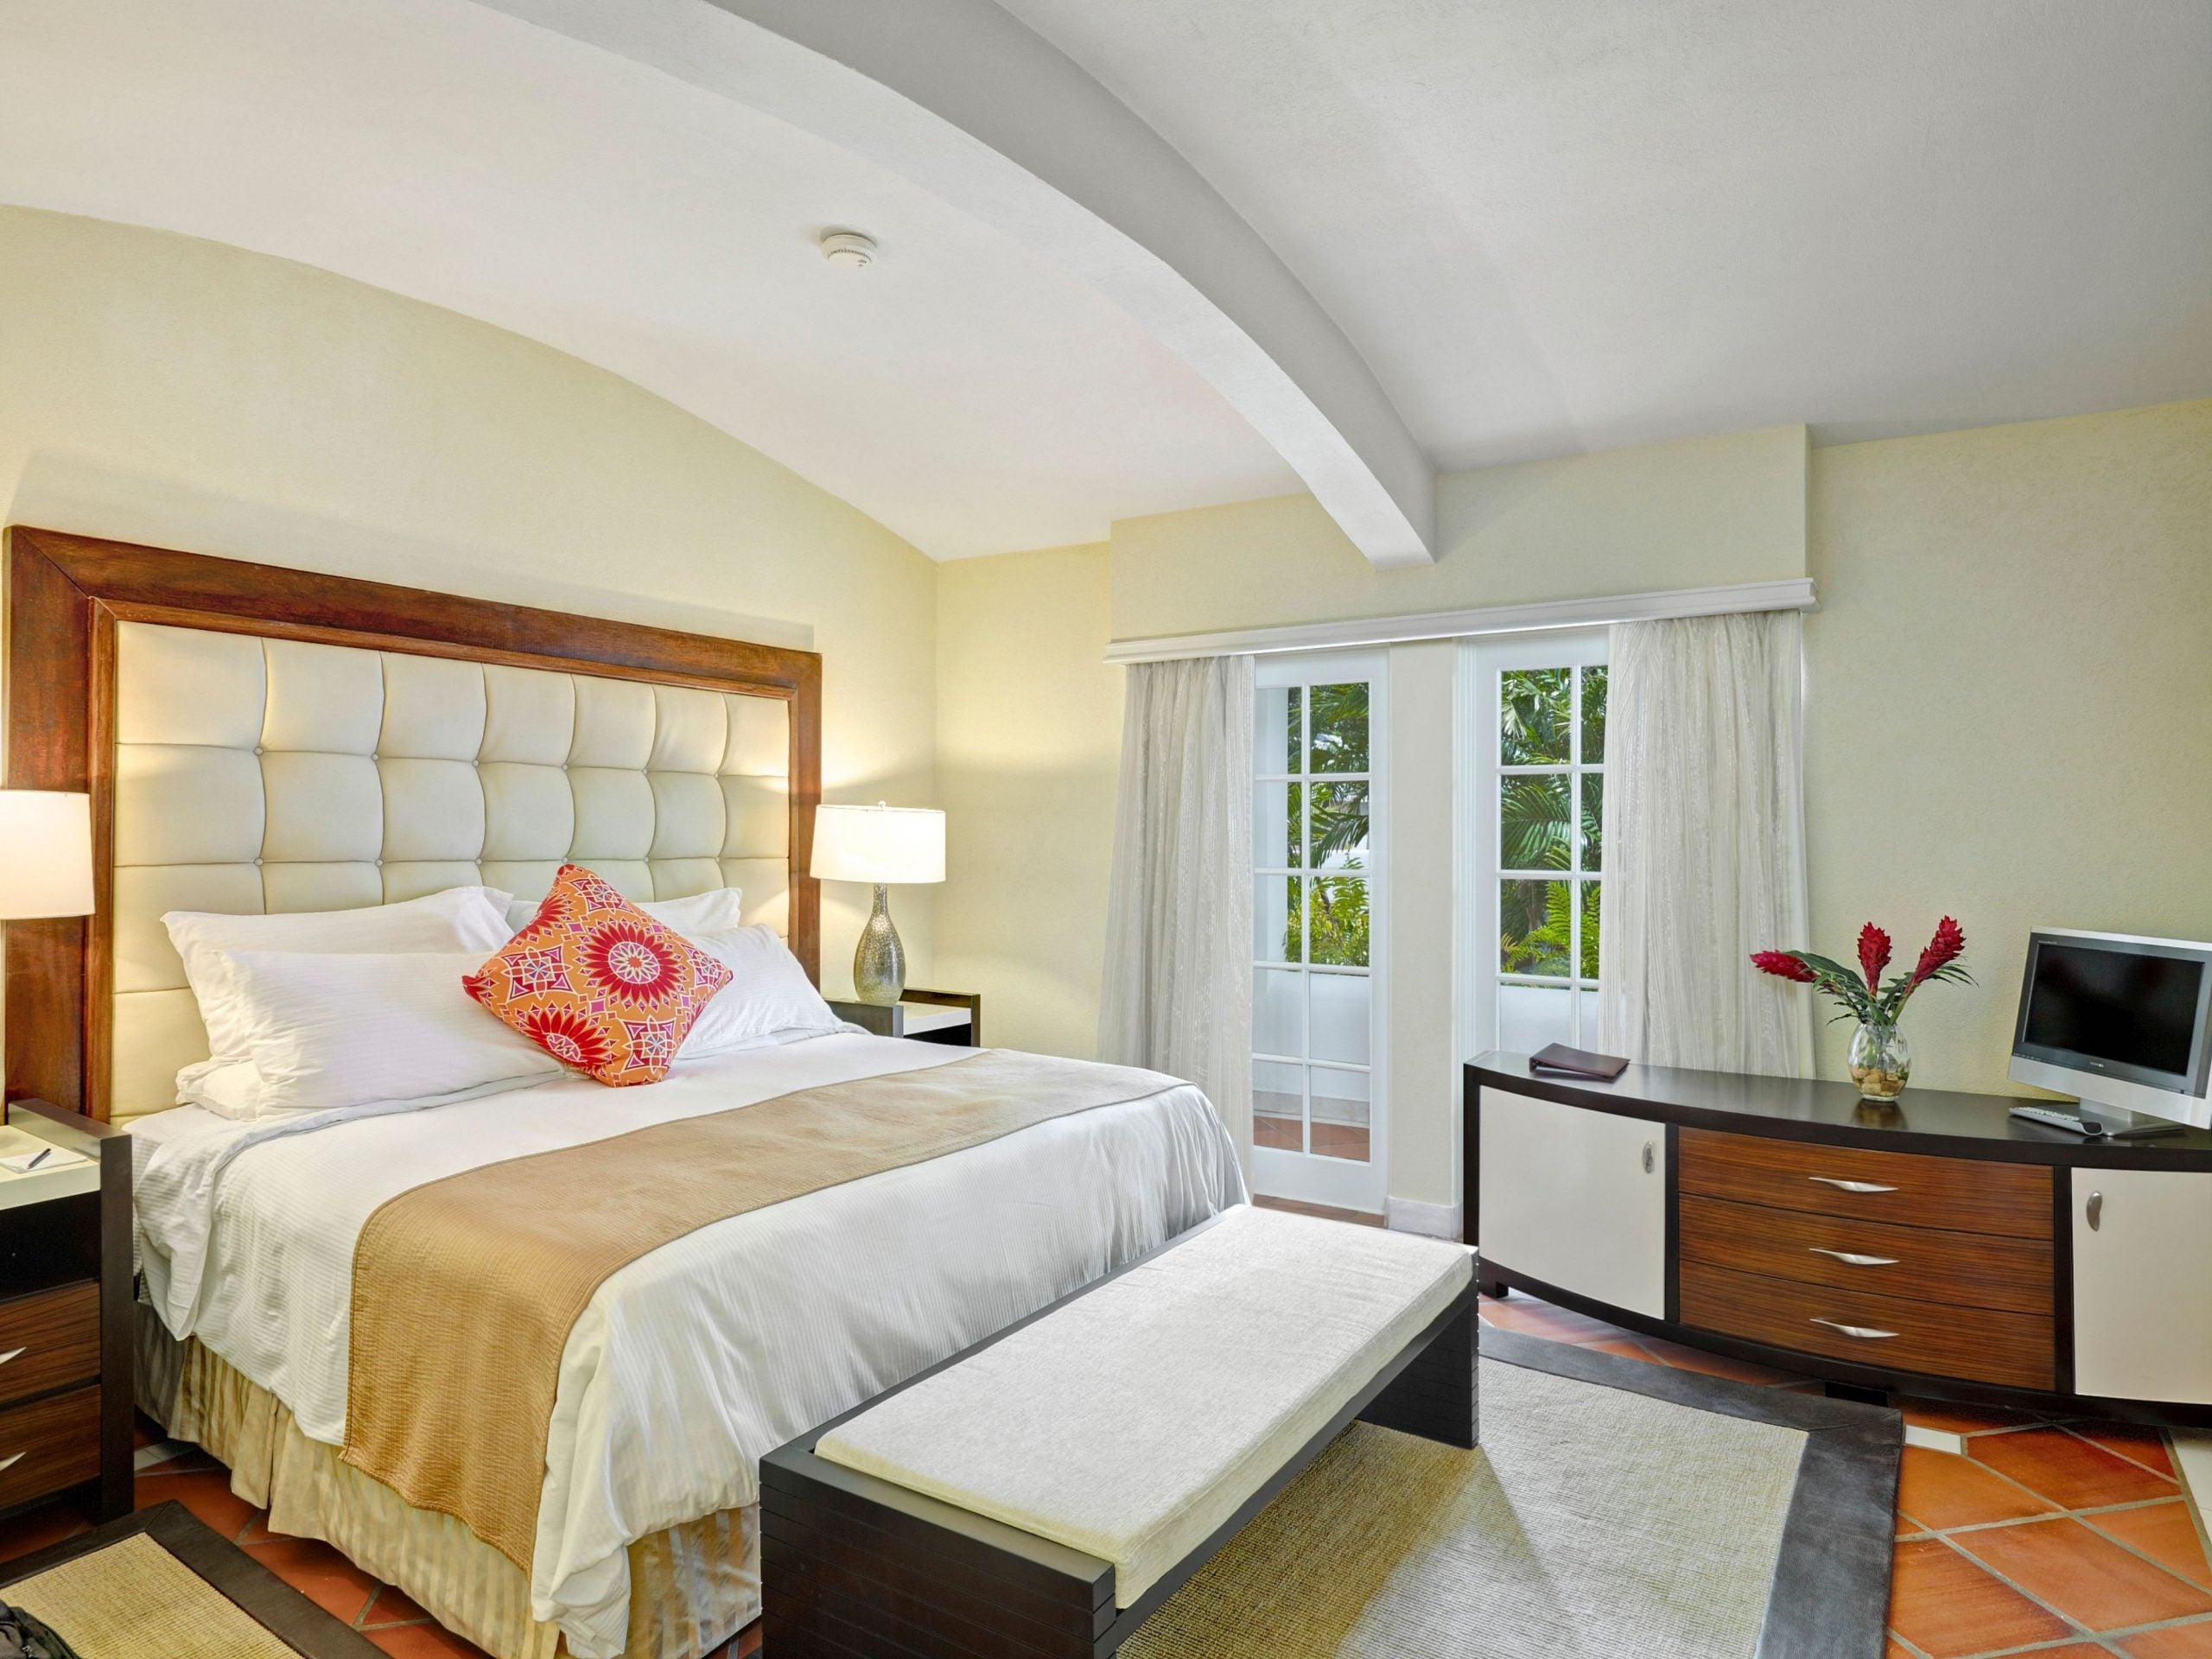 2 Barbados Resorts Set To Reopen As Part Of Marriott S All Inclusive Portfolio Laptrinhx News